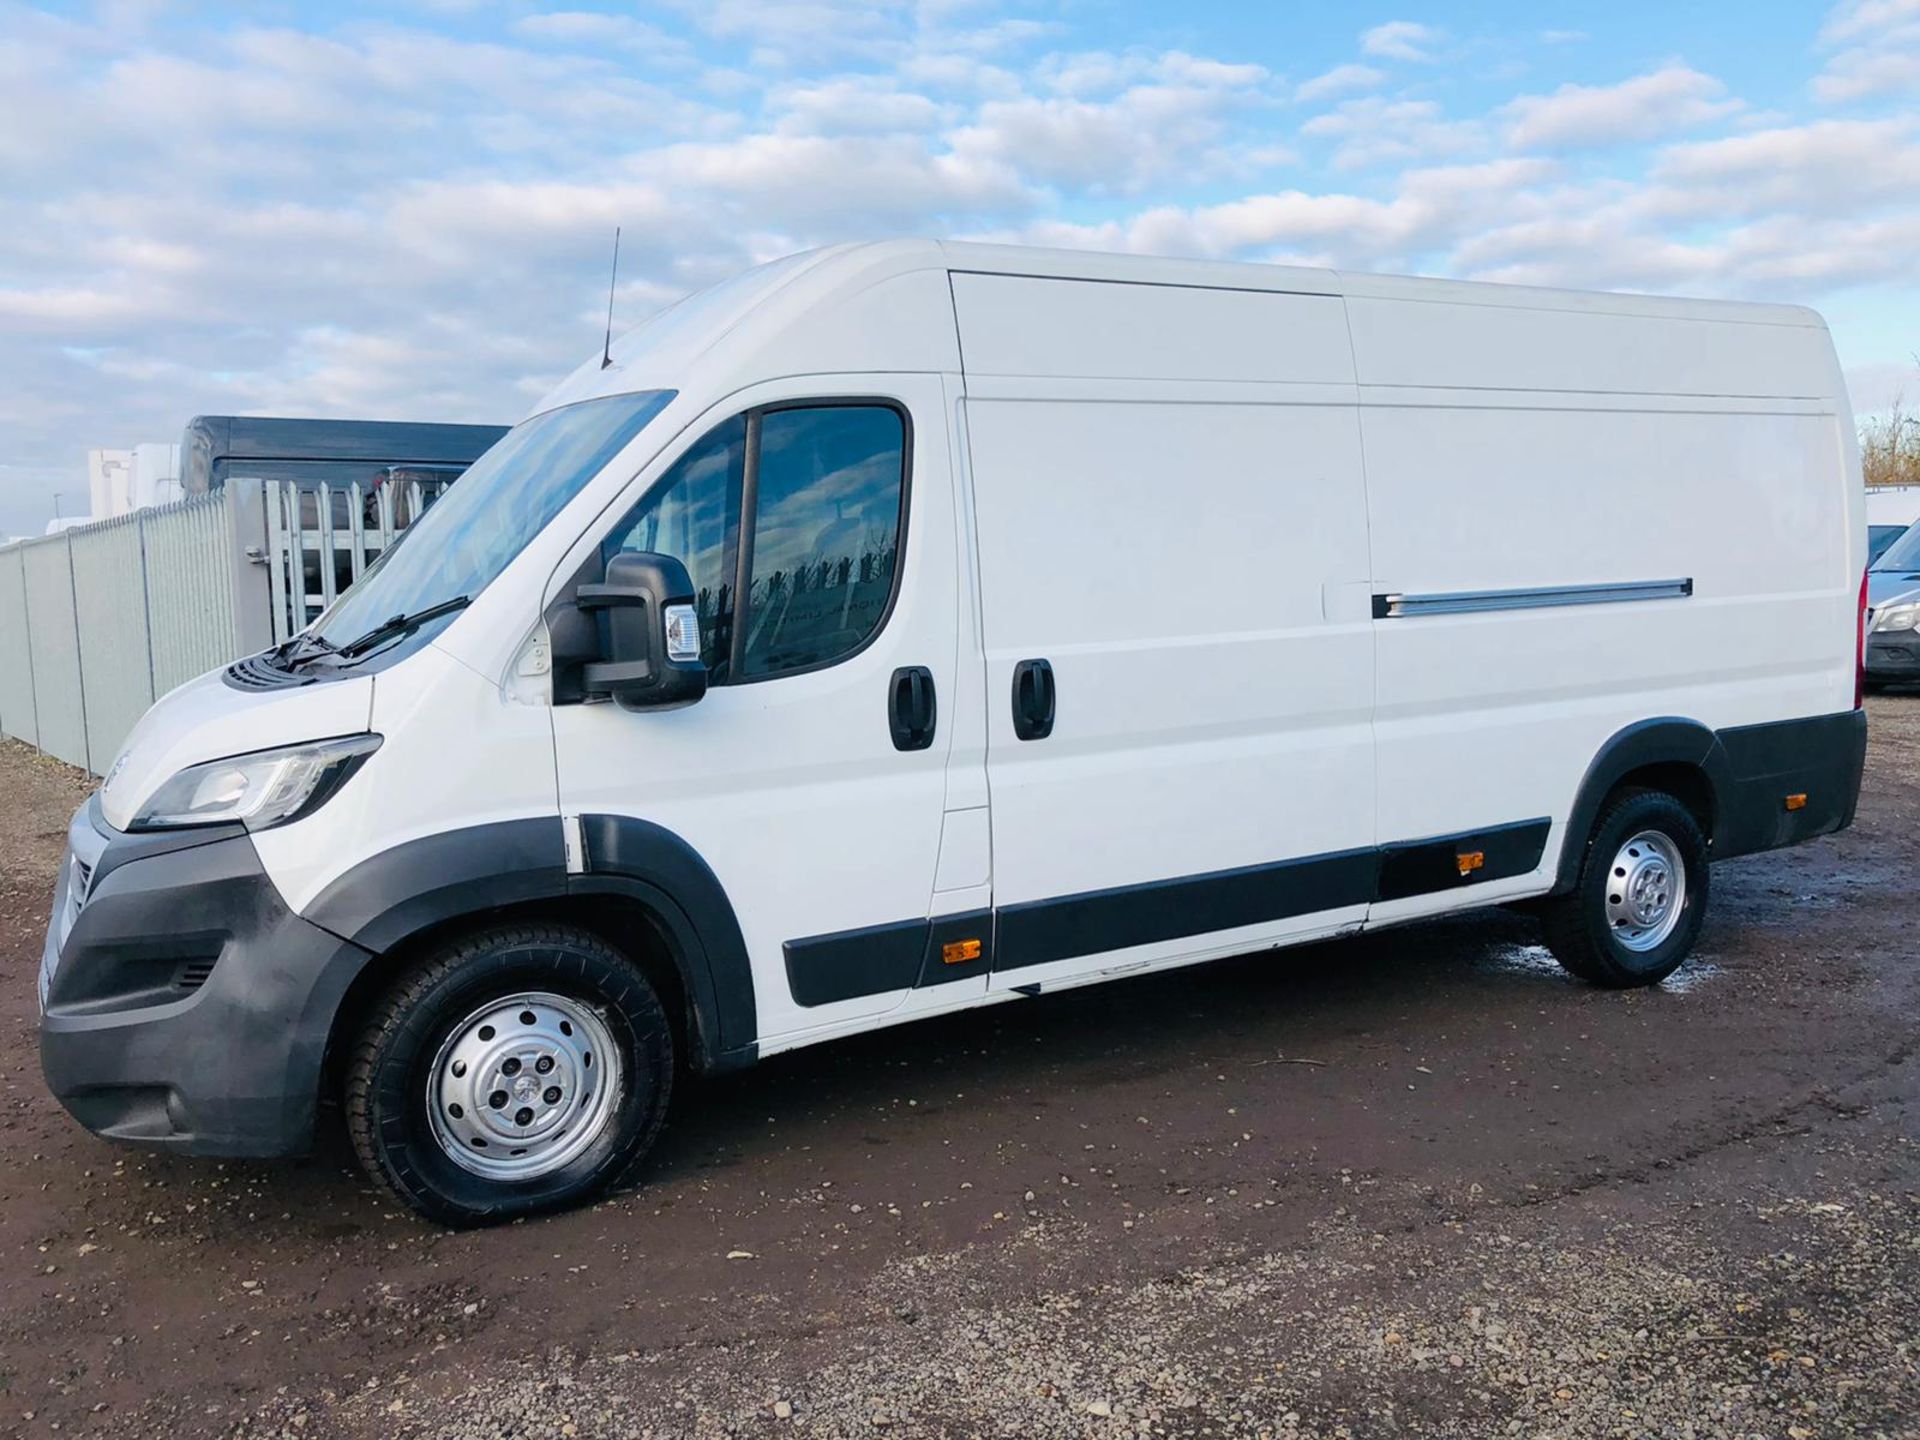 Peugeot Boxer 2.2 HDI 435 Professional L4 H2 2014 '64 Reg' Sat Nav - Air Con - Only Done 76K - Image 6 of 24